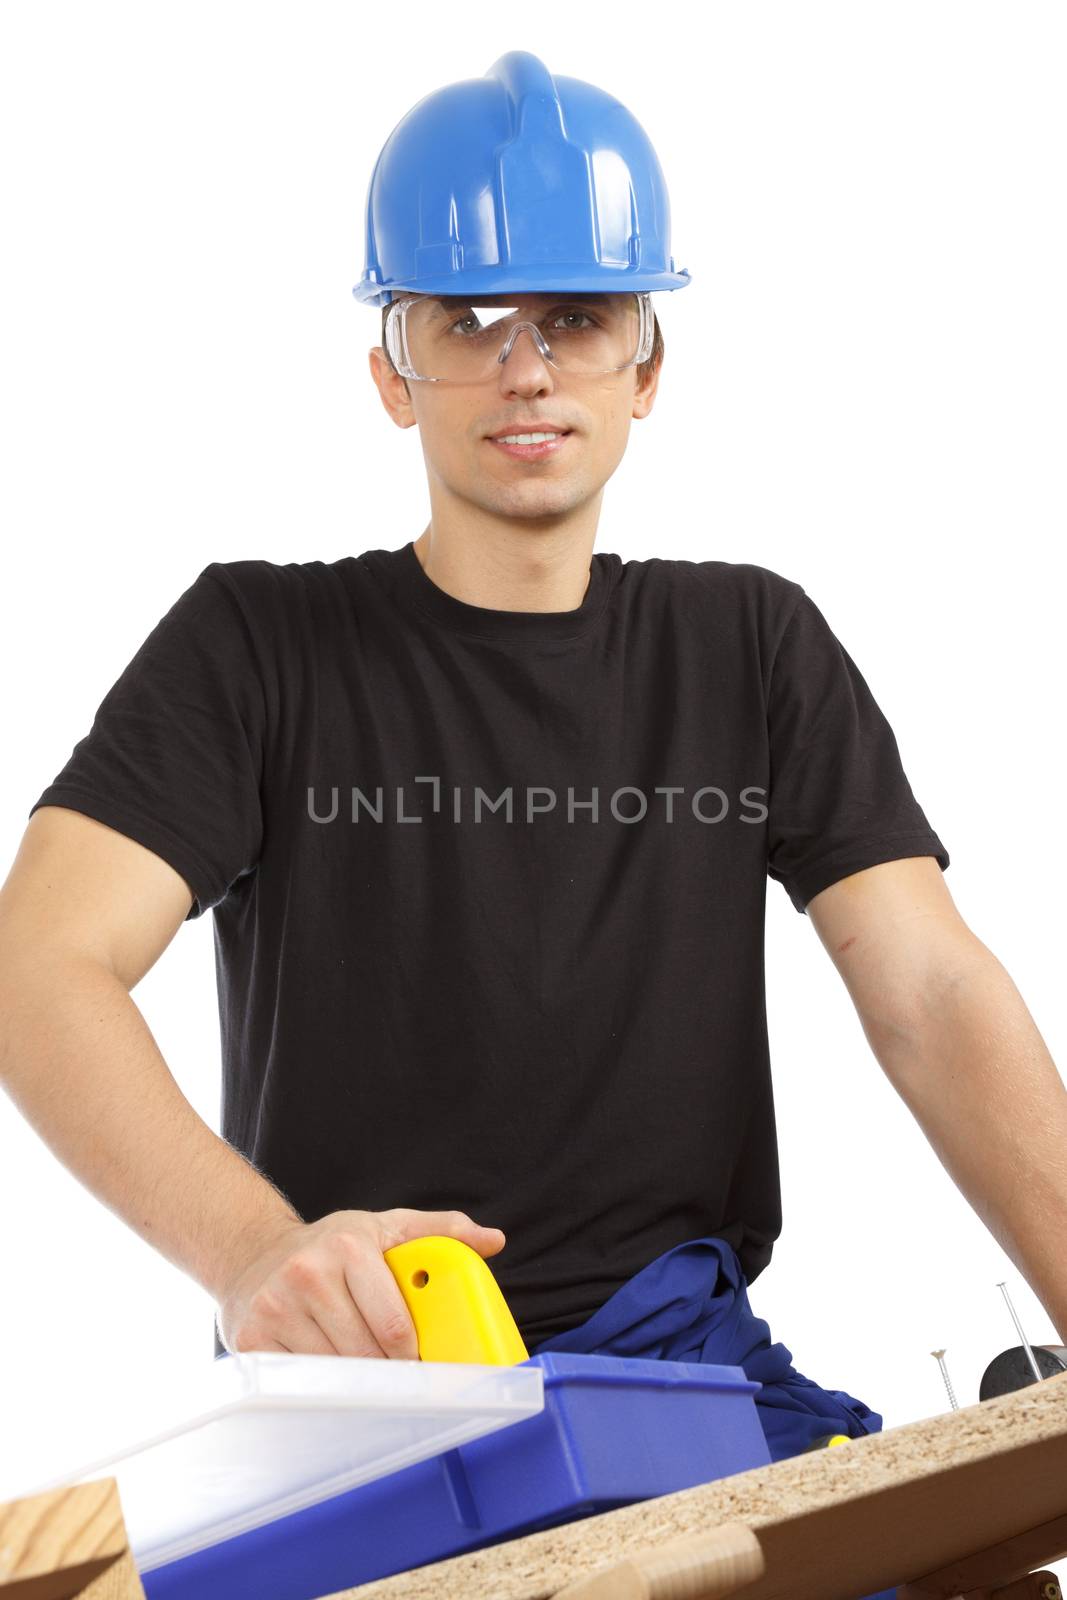 Man working with tools and wood. Over white.